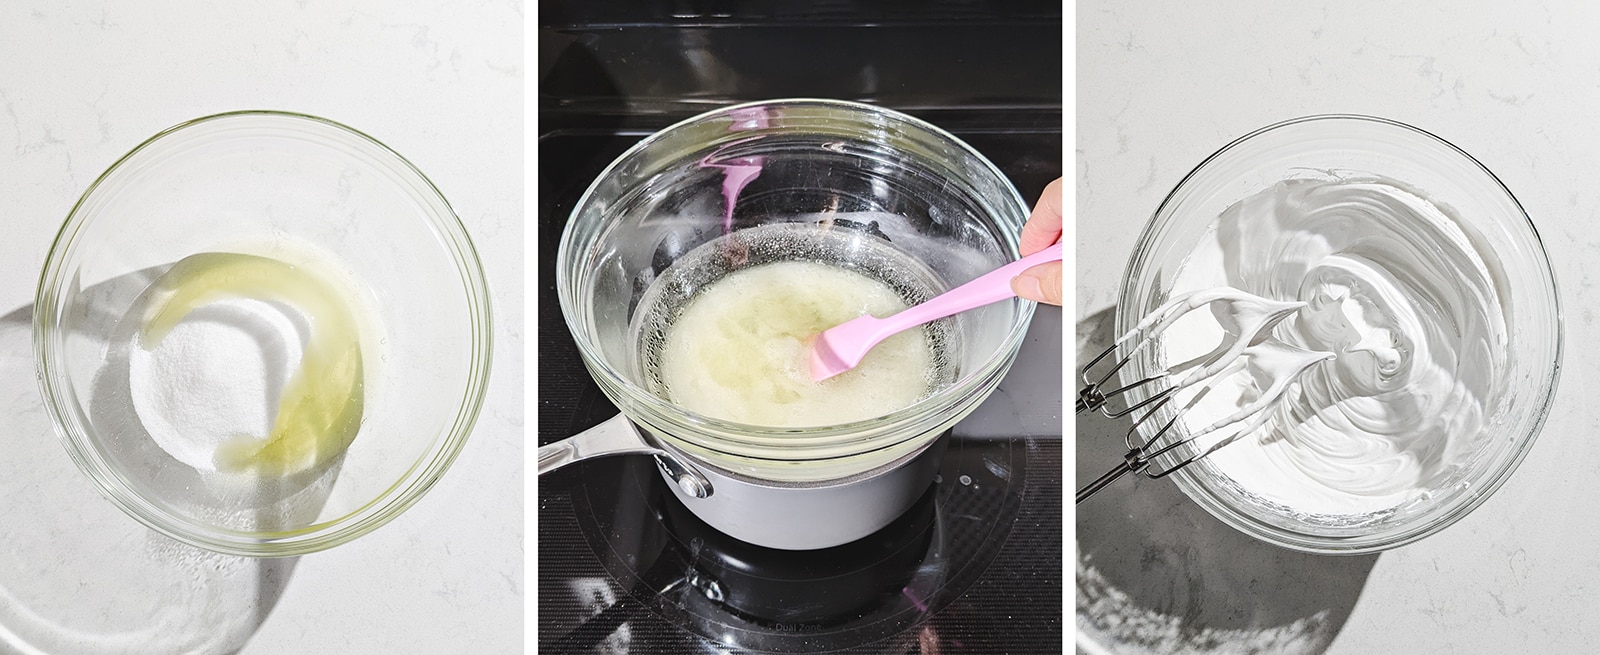 3 image collage of heating egg whites on the stove and whipping it into meringue.